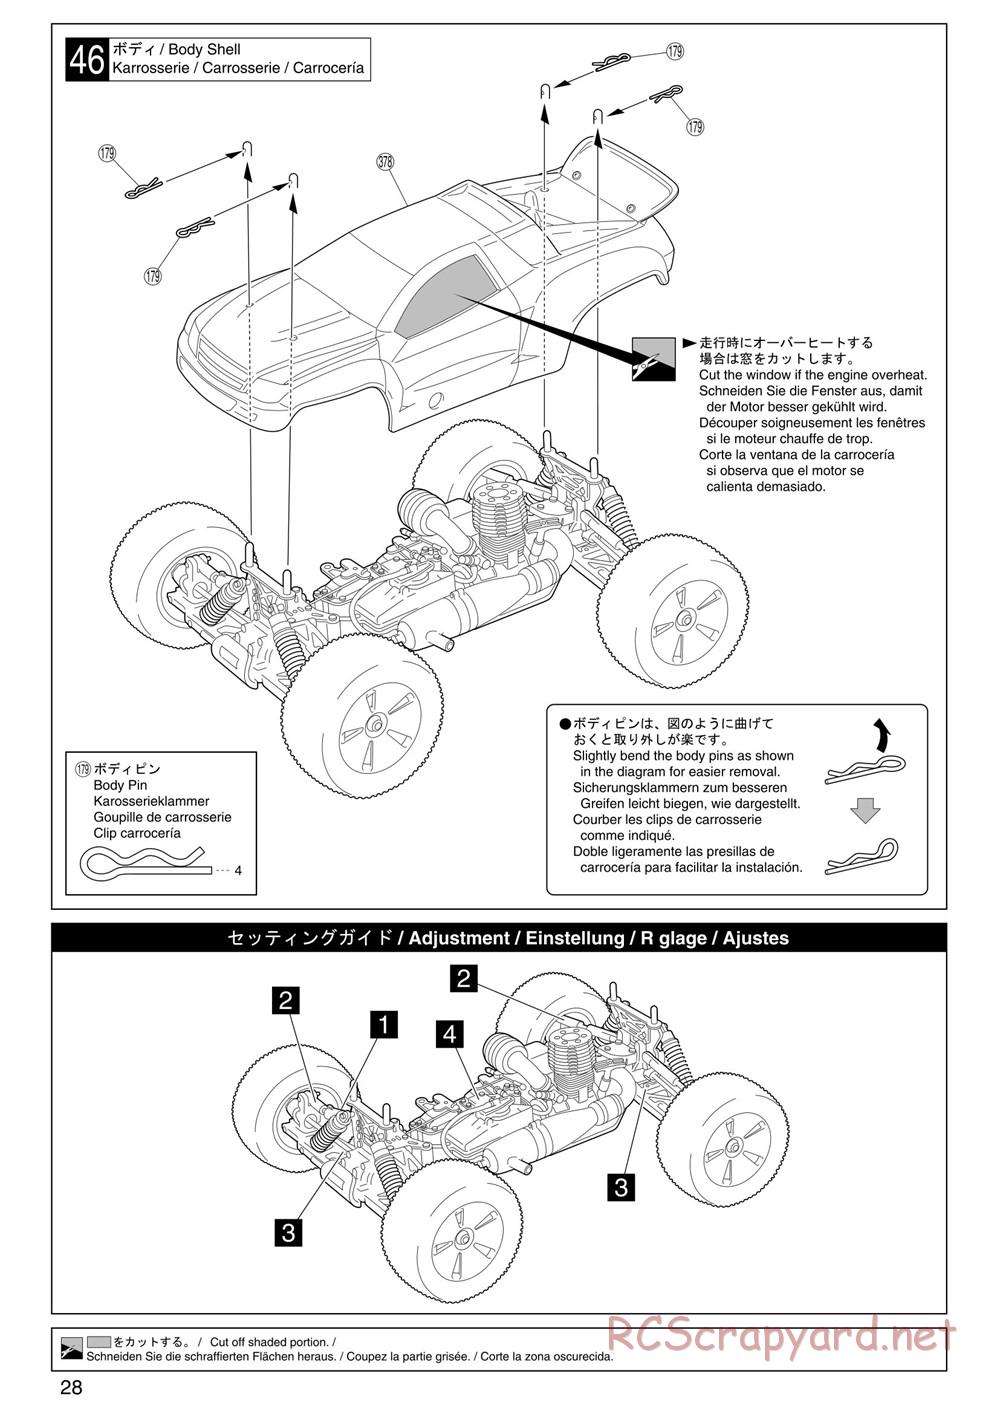 Kyosho - Inferno ST (2005) - Manual - Page 28